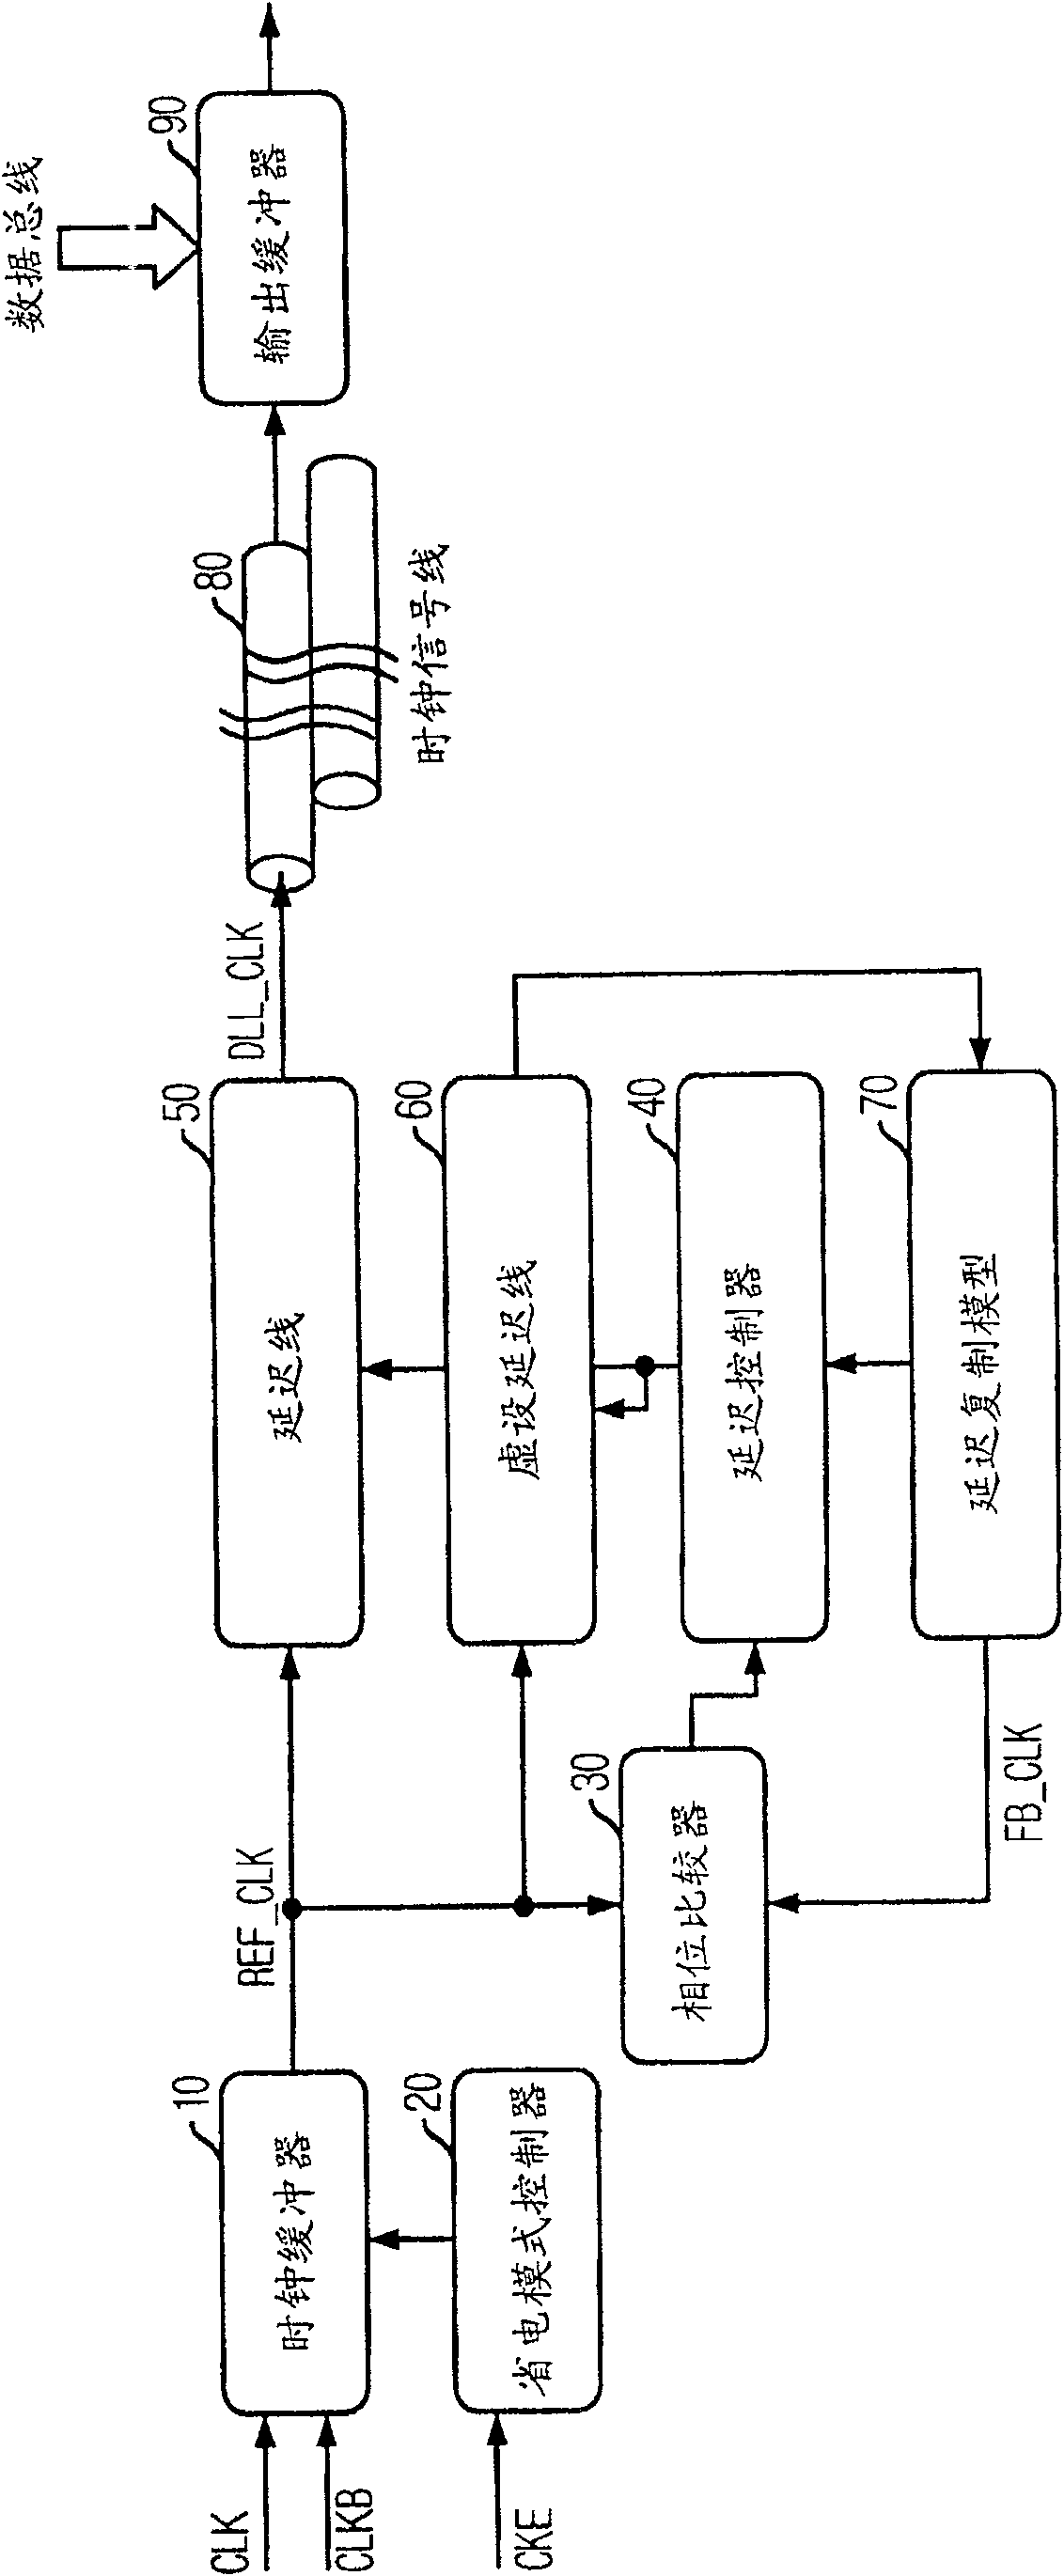 Delay locked loop circuit and method for provding delay locked loop clock of synchronous memory device